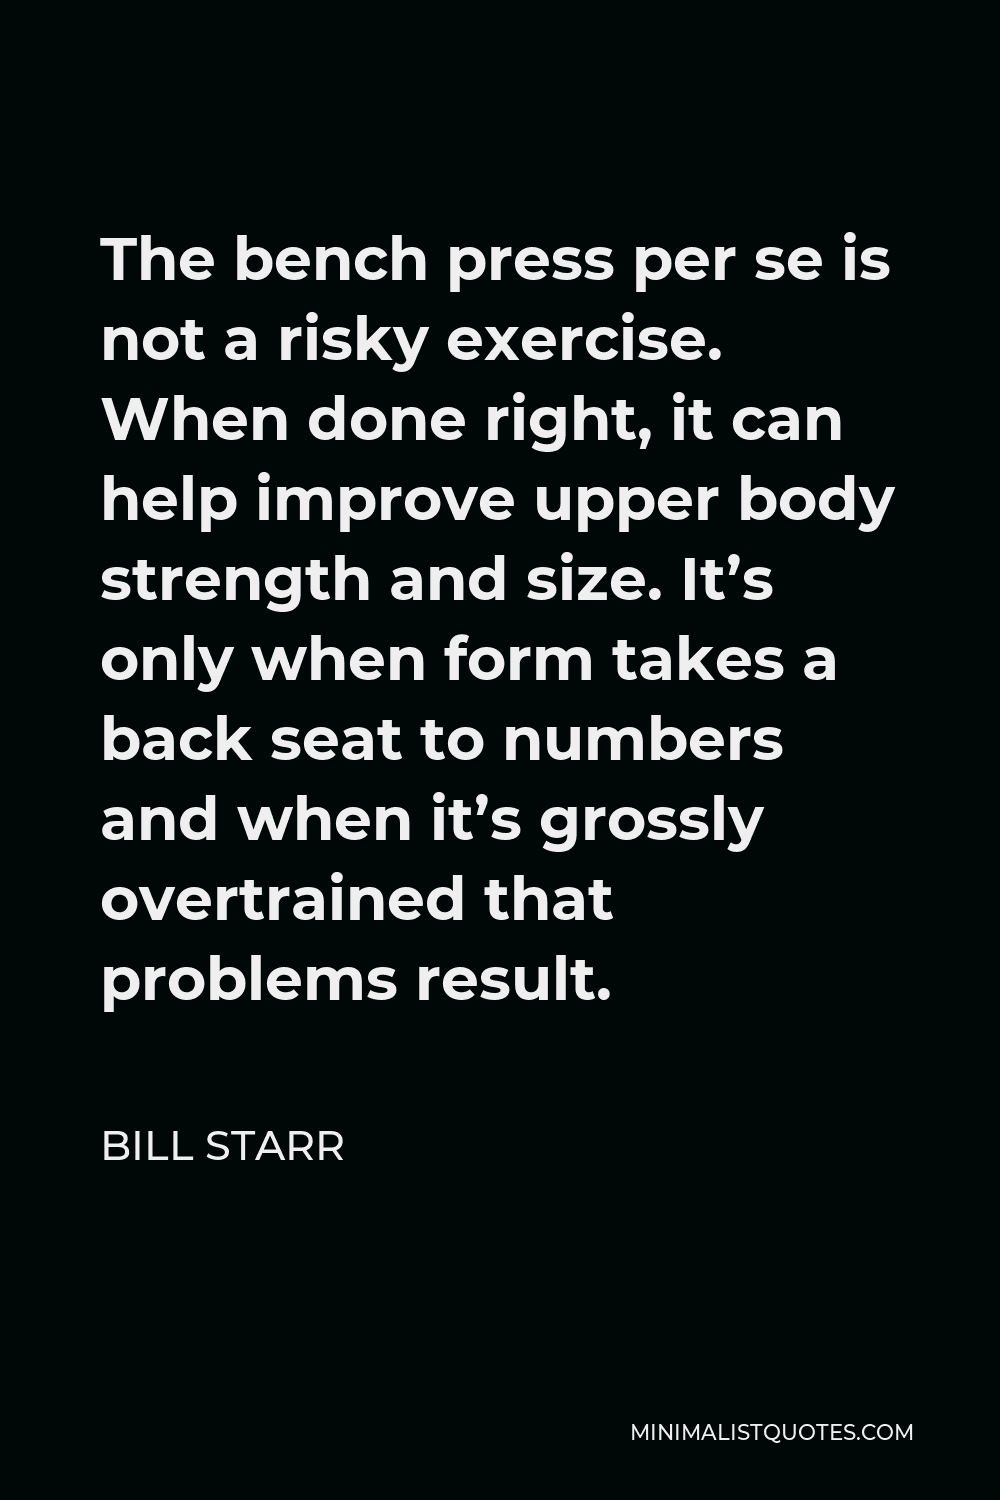 Bill Starr Quote - The bench press per se is not a risky exercise. When done right, it can help improve upper body strength and size. It’s only when form takes a back seat to numbers and when it’s grossly overtrained that problems result.